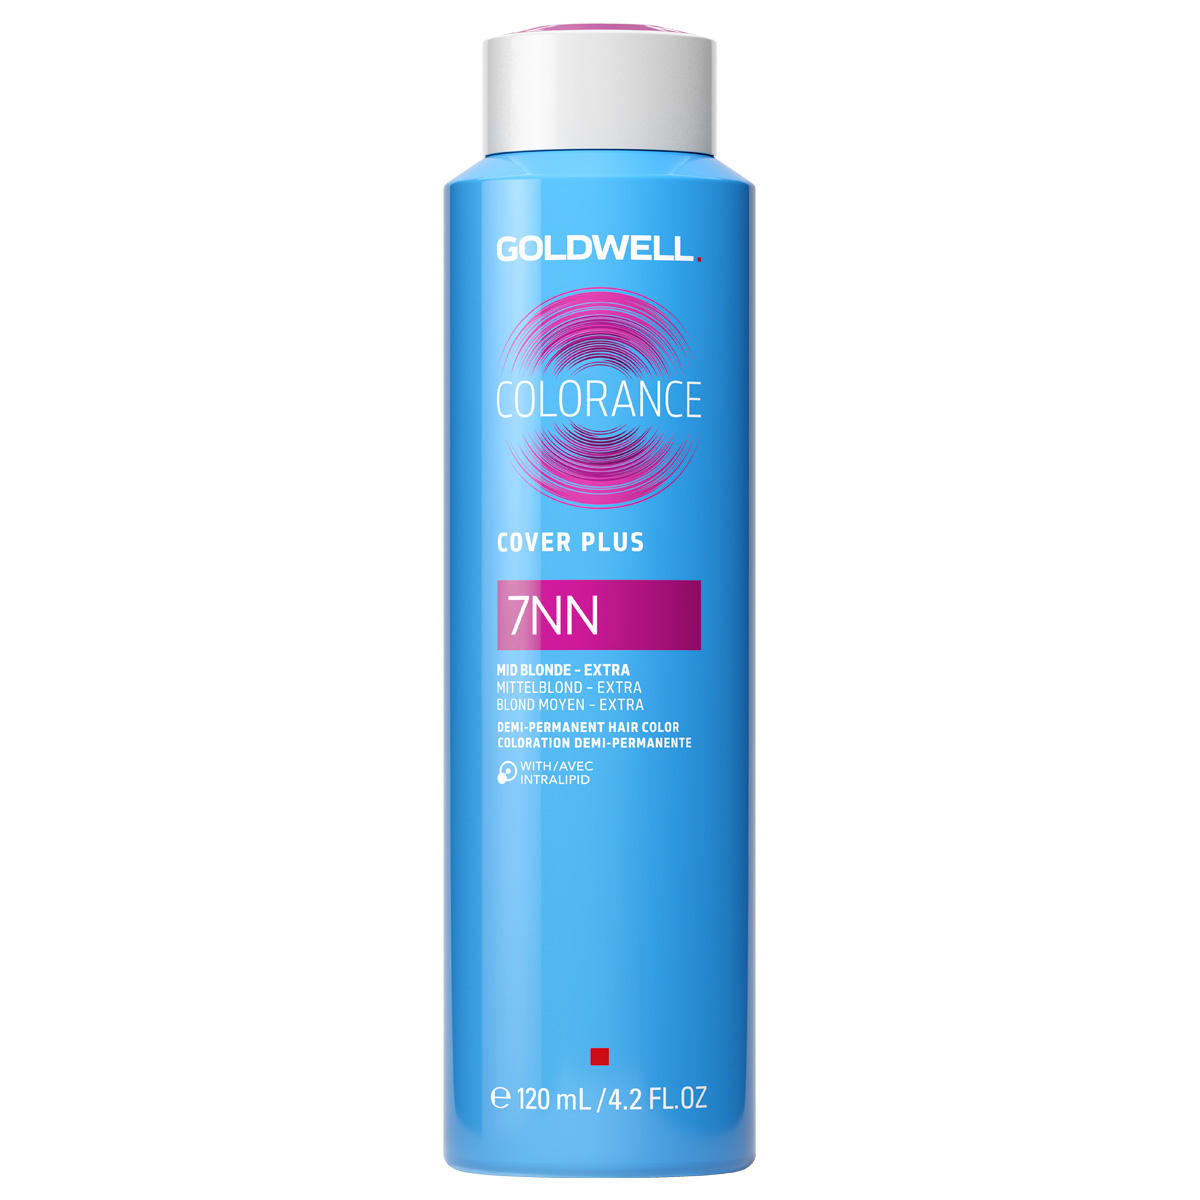 Goldwell Colorance Cover Plus Demi-Permanent Hair Color 7NN Mittelblond Extra 120 ml